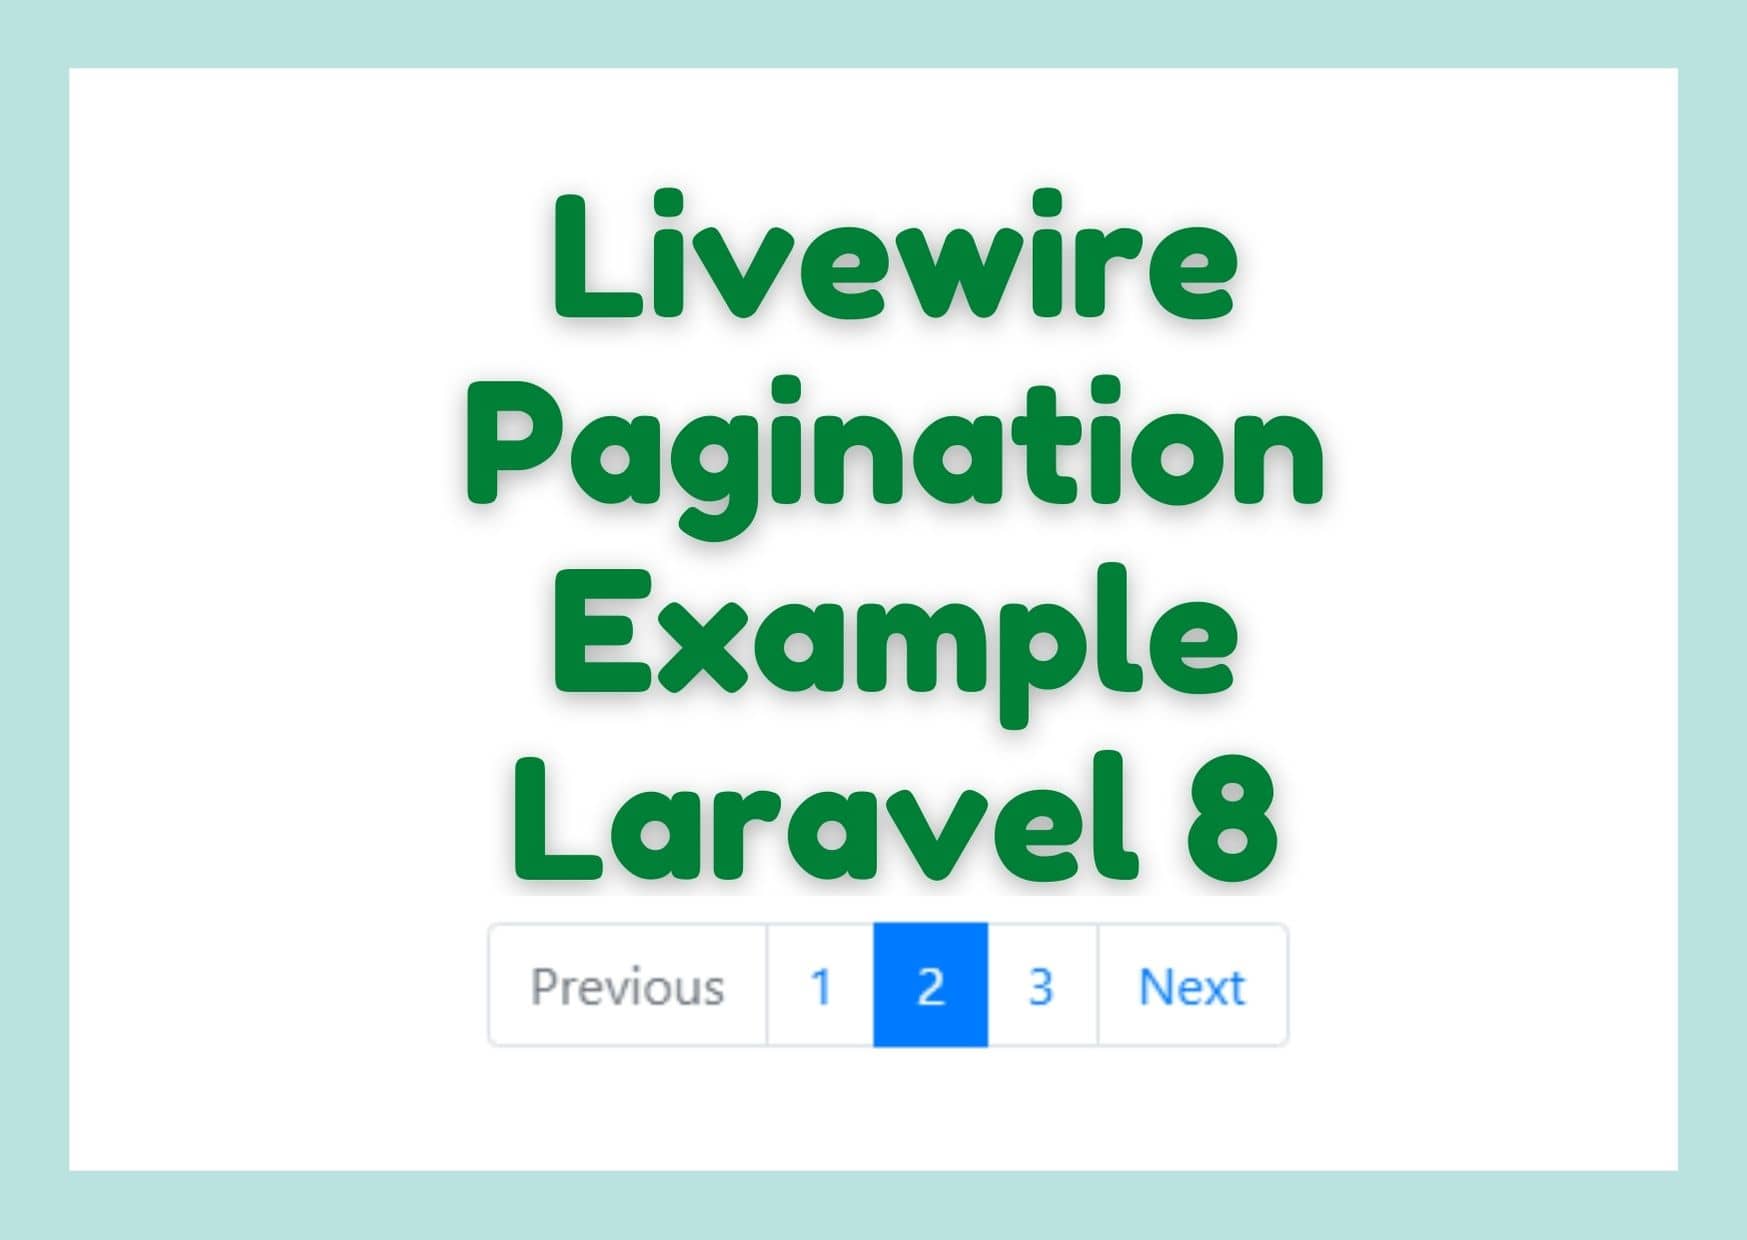 Livewire Pagination  / How To Create Livewire Pagination Example